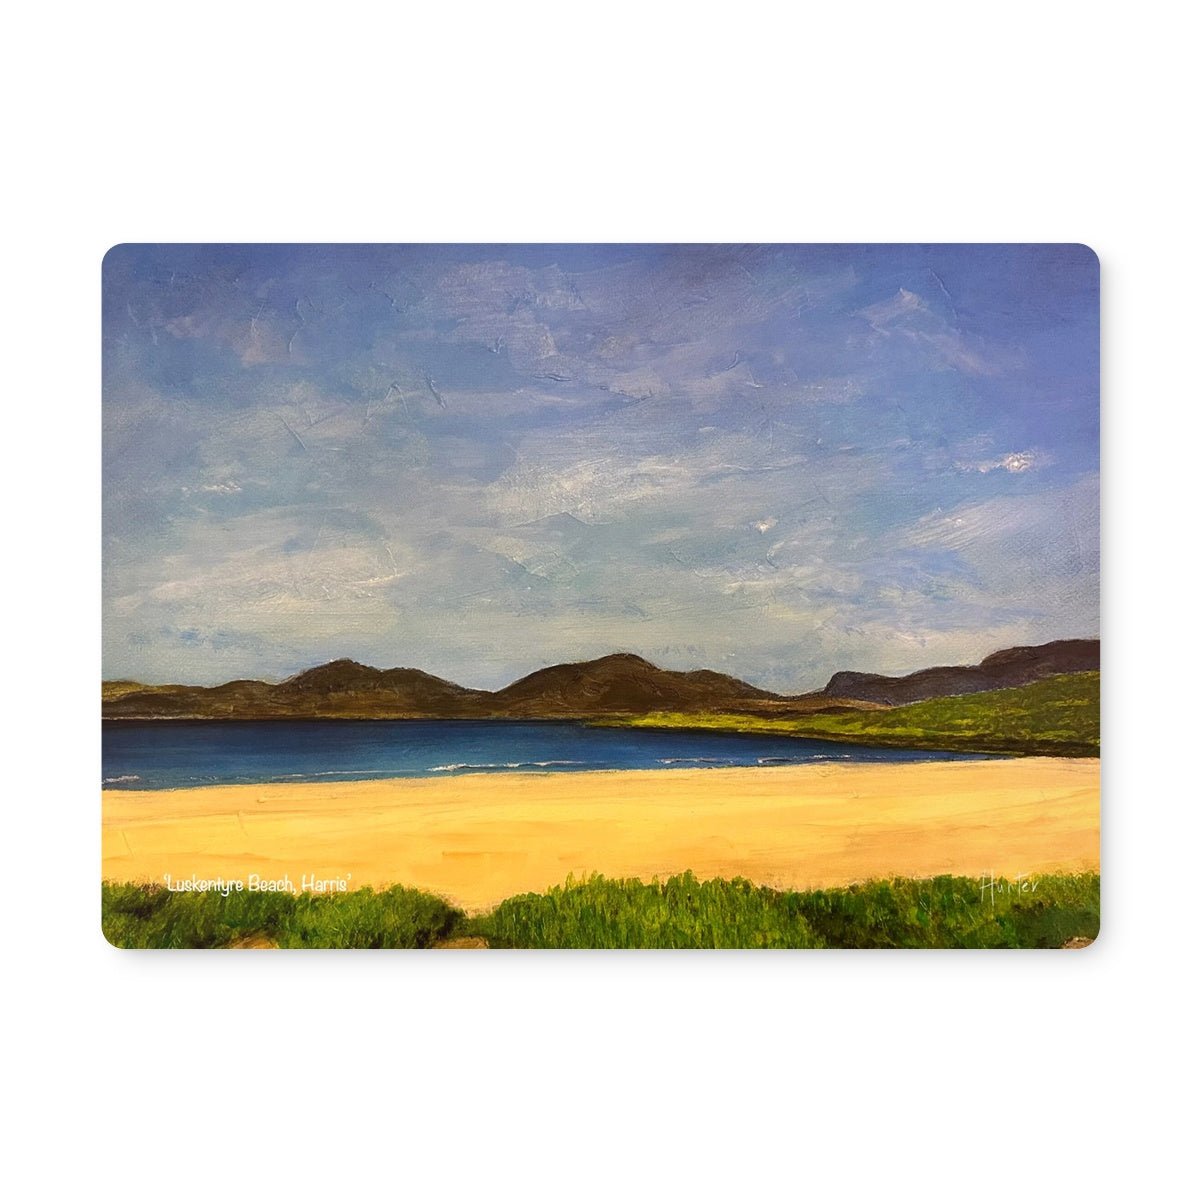 Luskentyre Beach Harris Art Gifts Placemat-Placemats-Hebridean Islands Art Gallery-6 Placemats-Paintings, Prints, Homeware, Art Gifts From Scotland By Scottish Artist Kevin Hunter